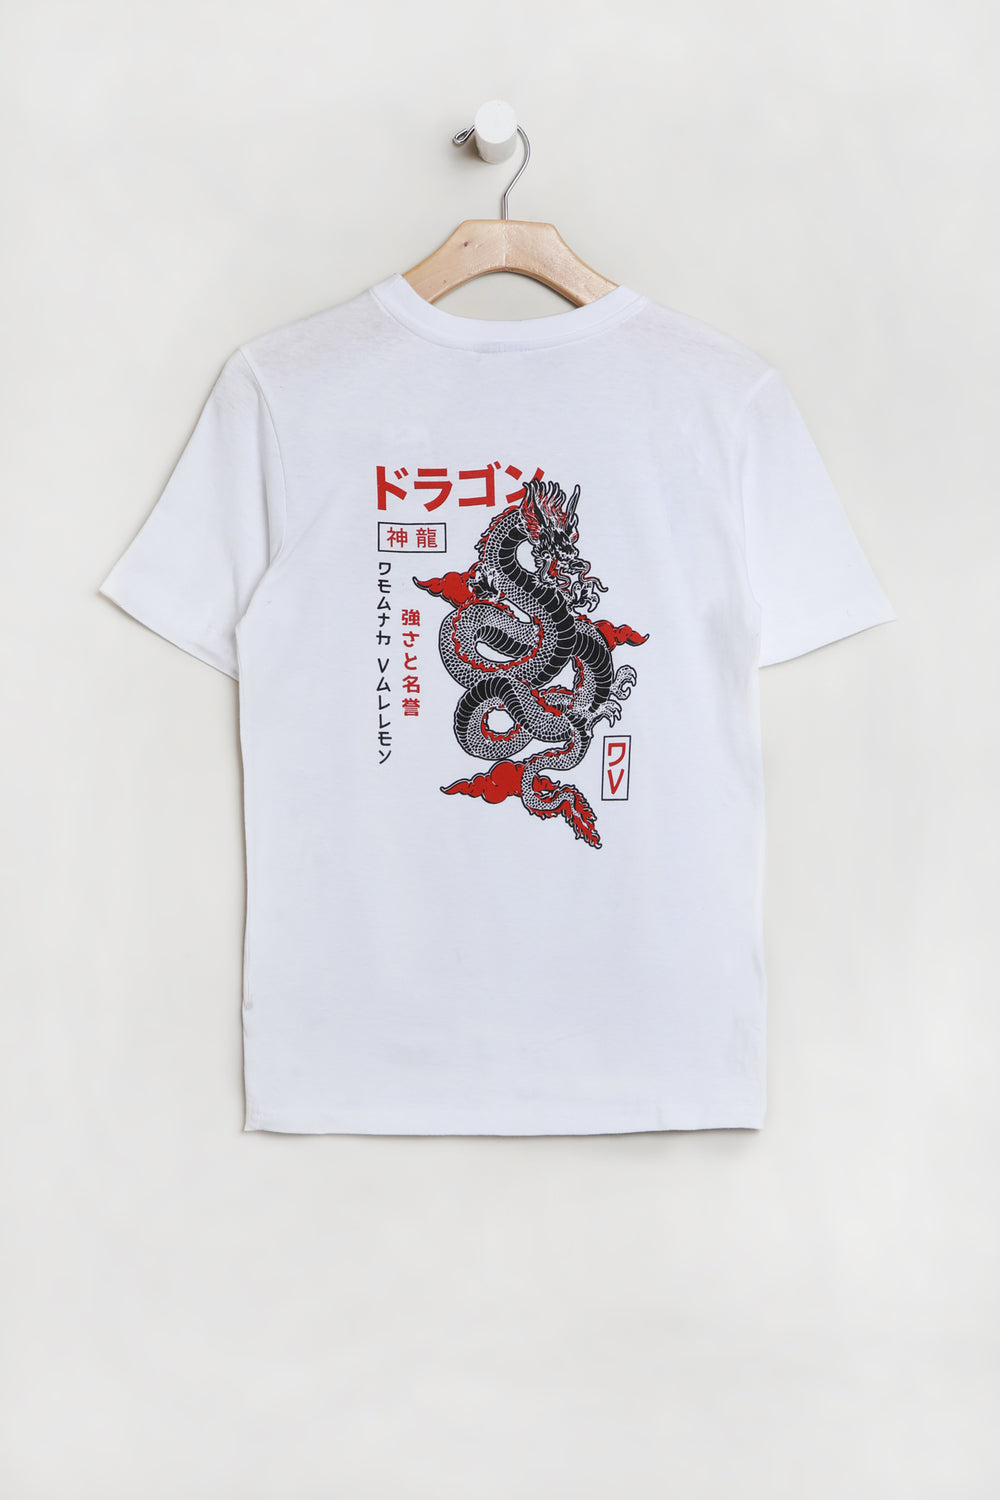 Death Valley Youth Dragon T-Shirt Death Valley Youth Dragon T-Shirt